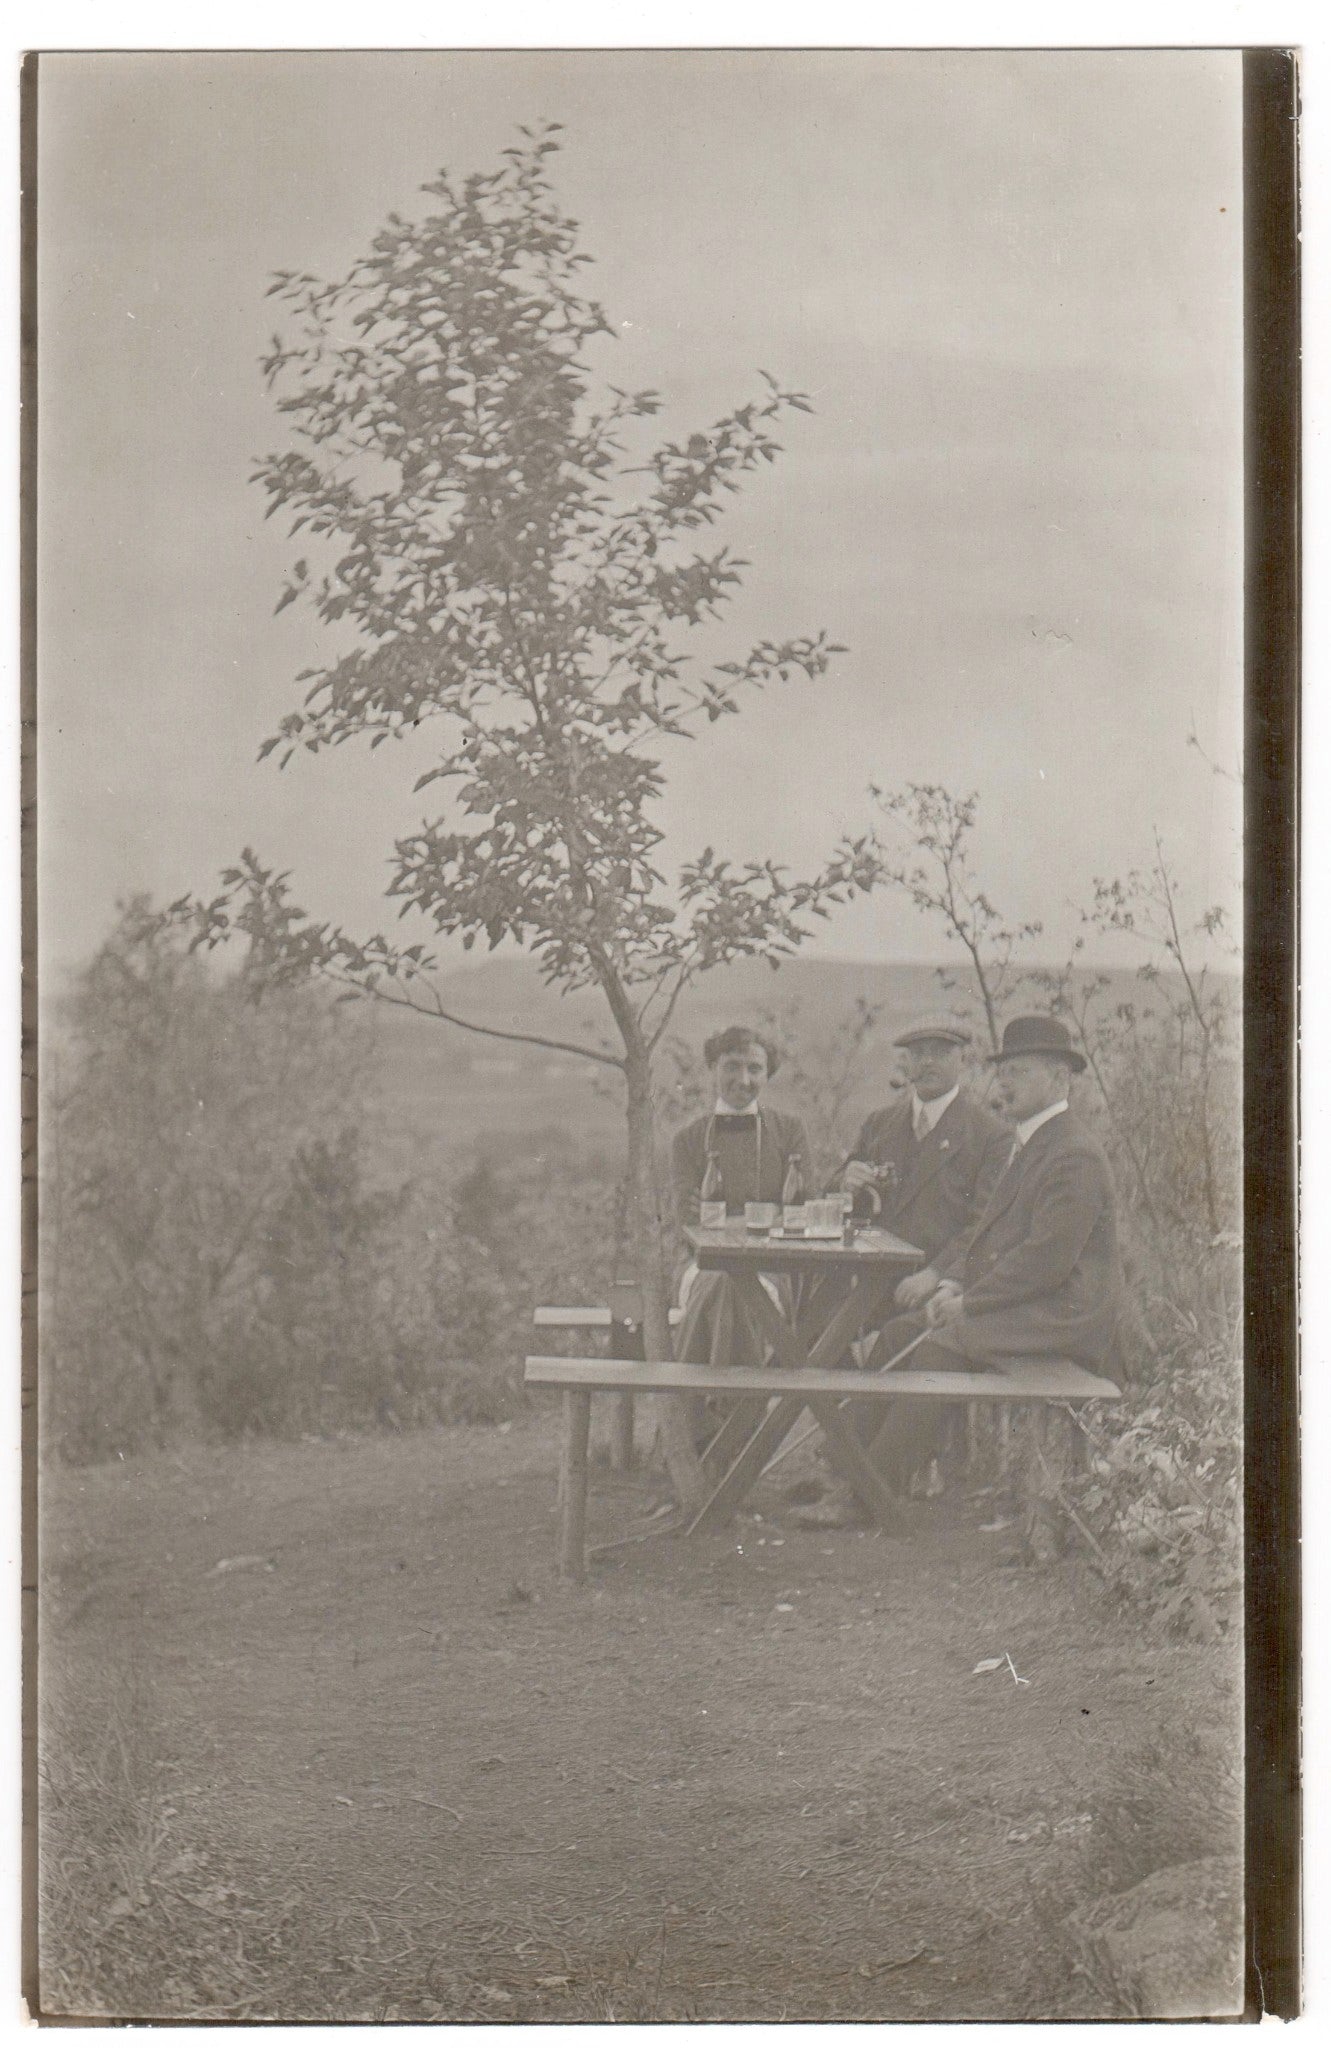 Vintage Postcard - Group Portrait on a Picnic - Sweden - Man with a Smoking Pipe